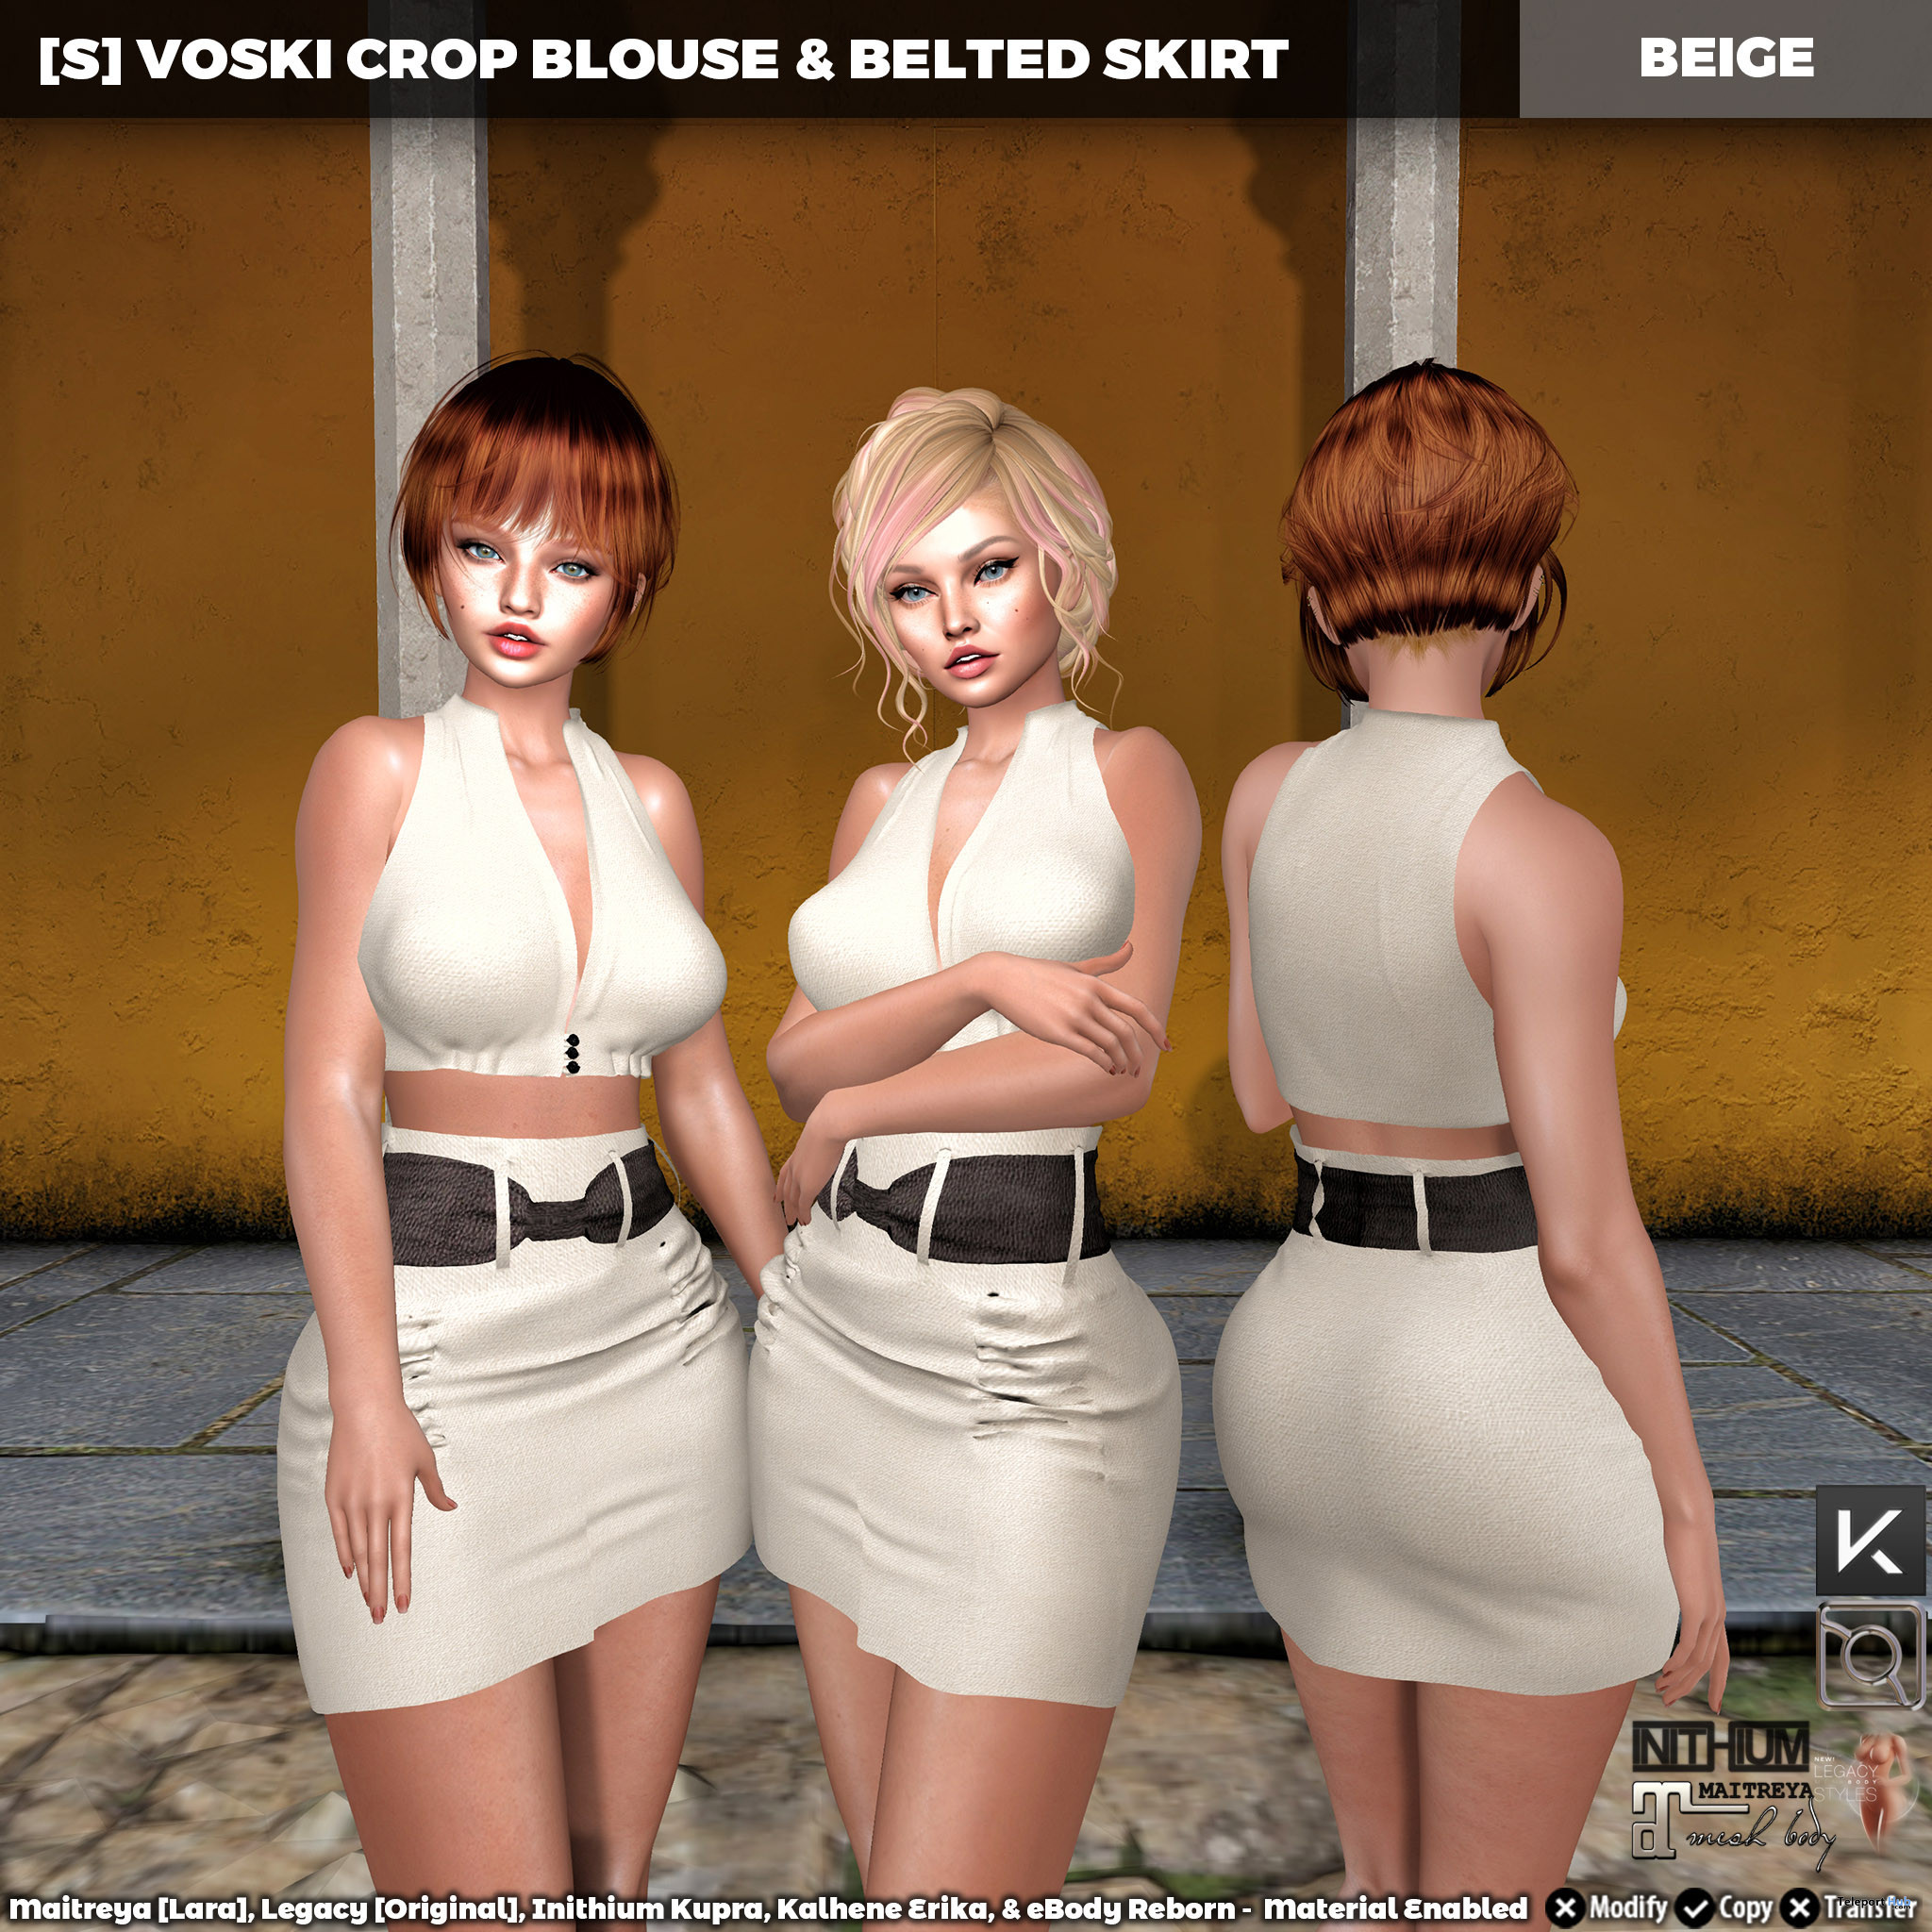 New Release: [S] Voski Crop Blouse & Belted Skirt by [satus Inc] - Teleport Hub - teleporthub.com